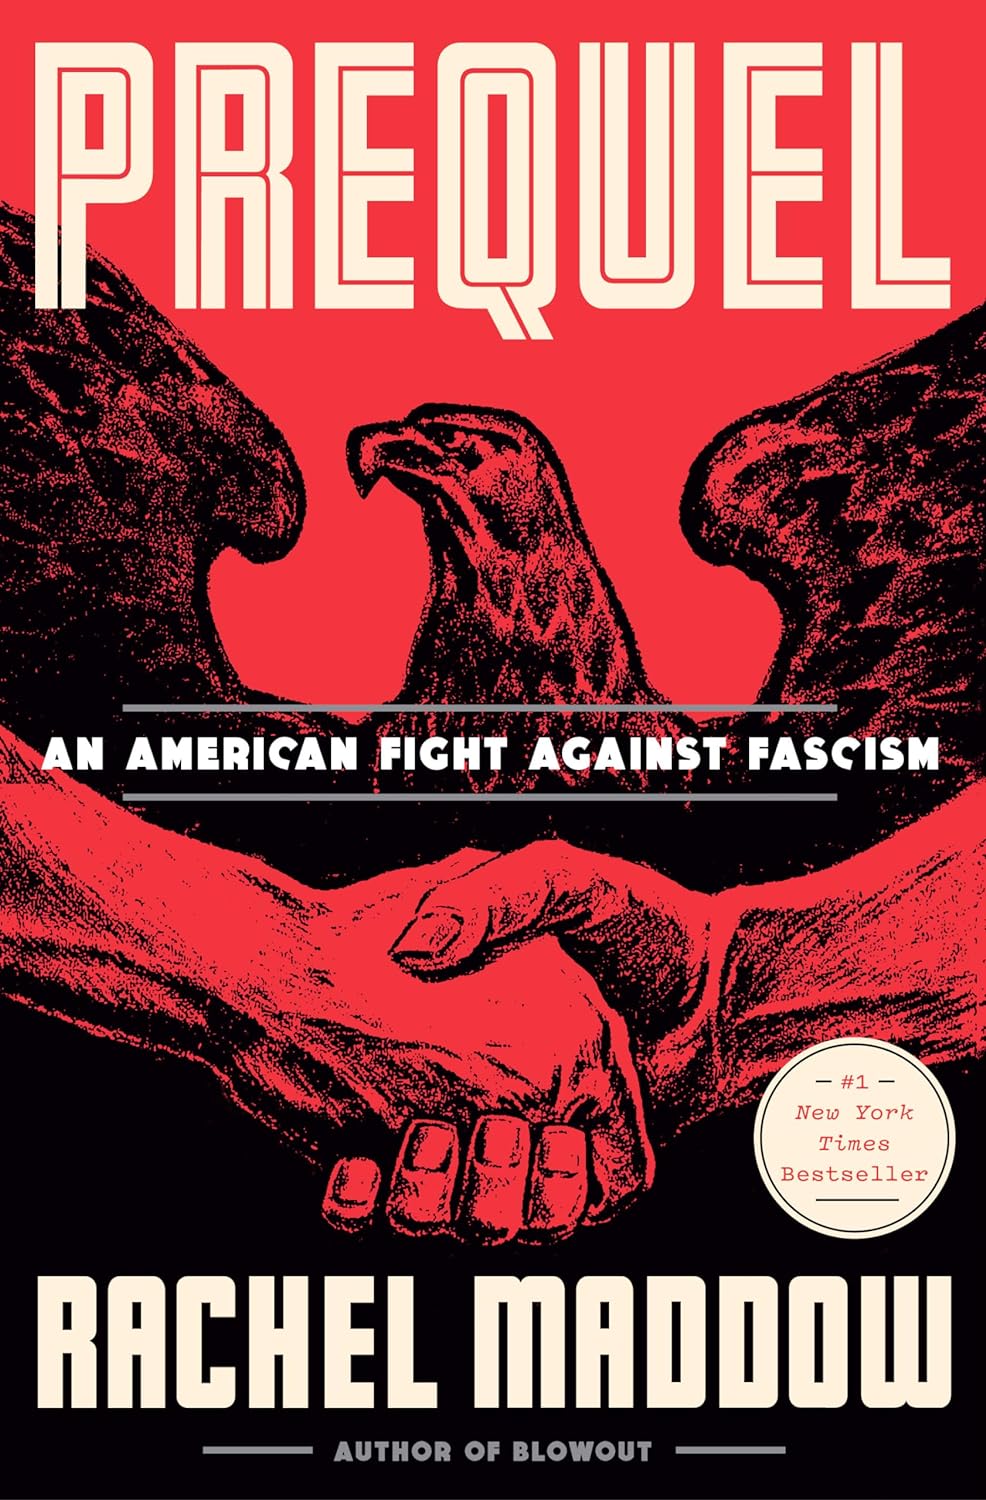 Prequel: An American Fight Against Fascism (Hardcover, Crown)